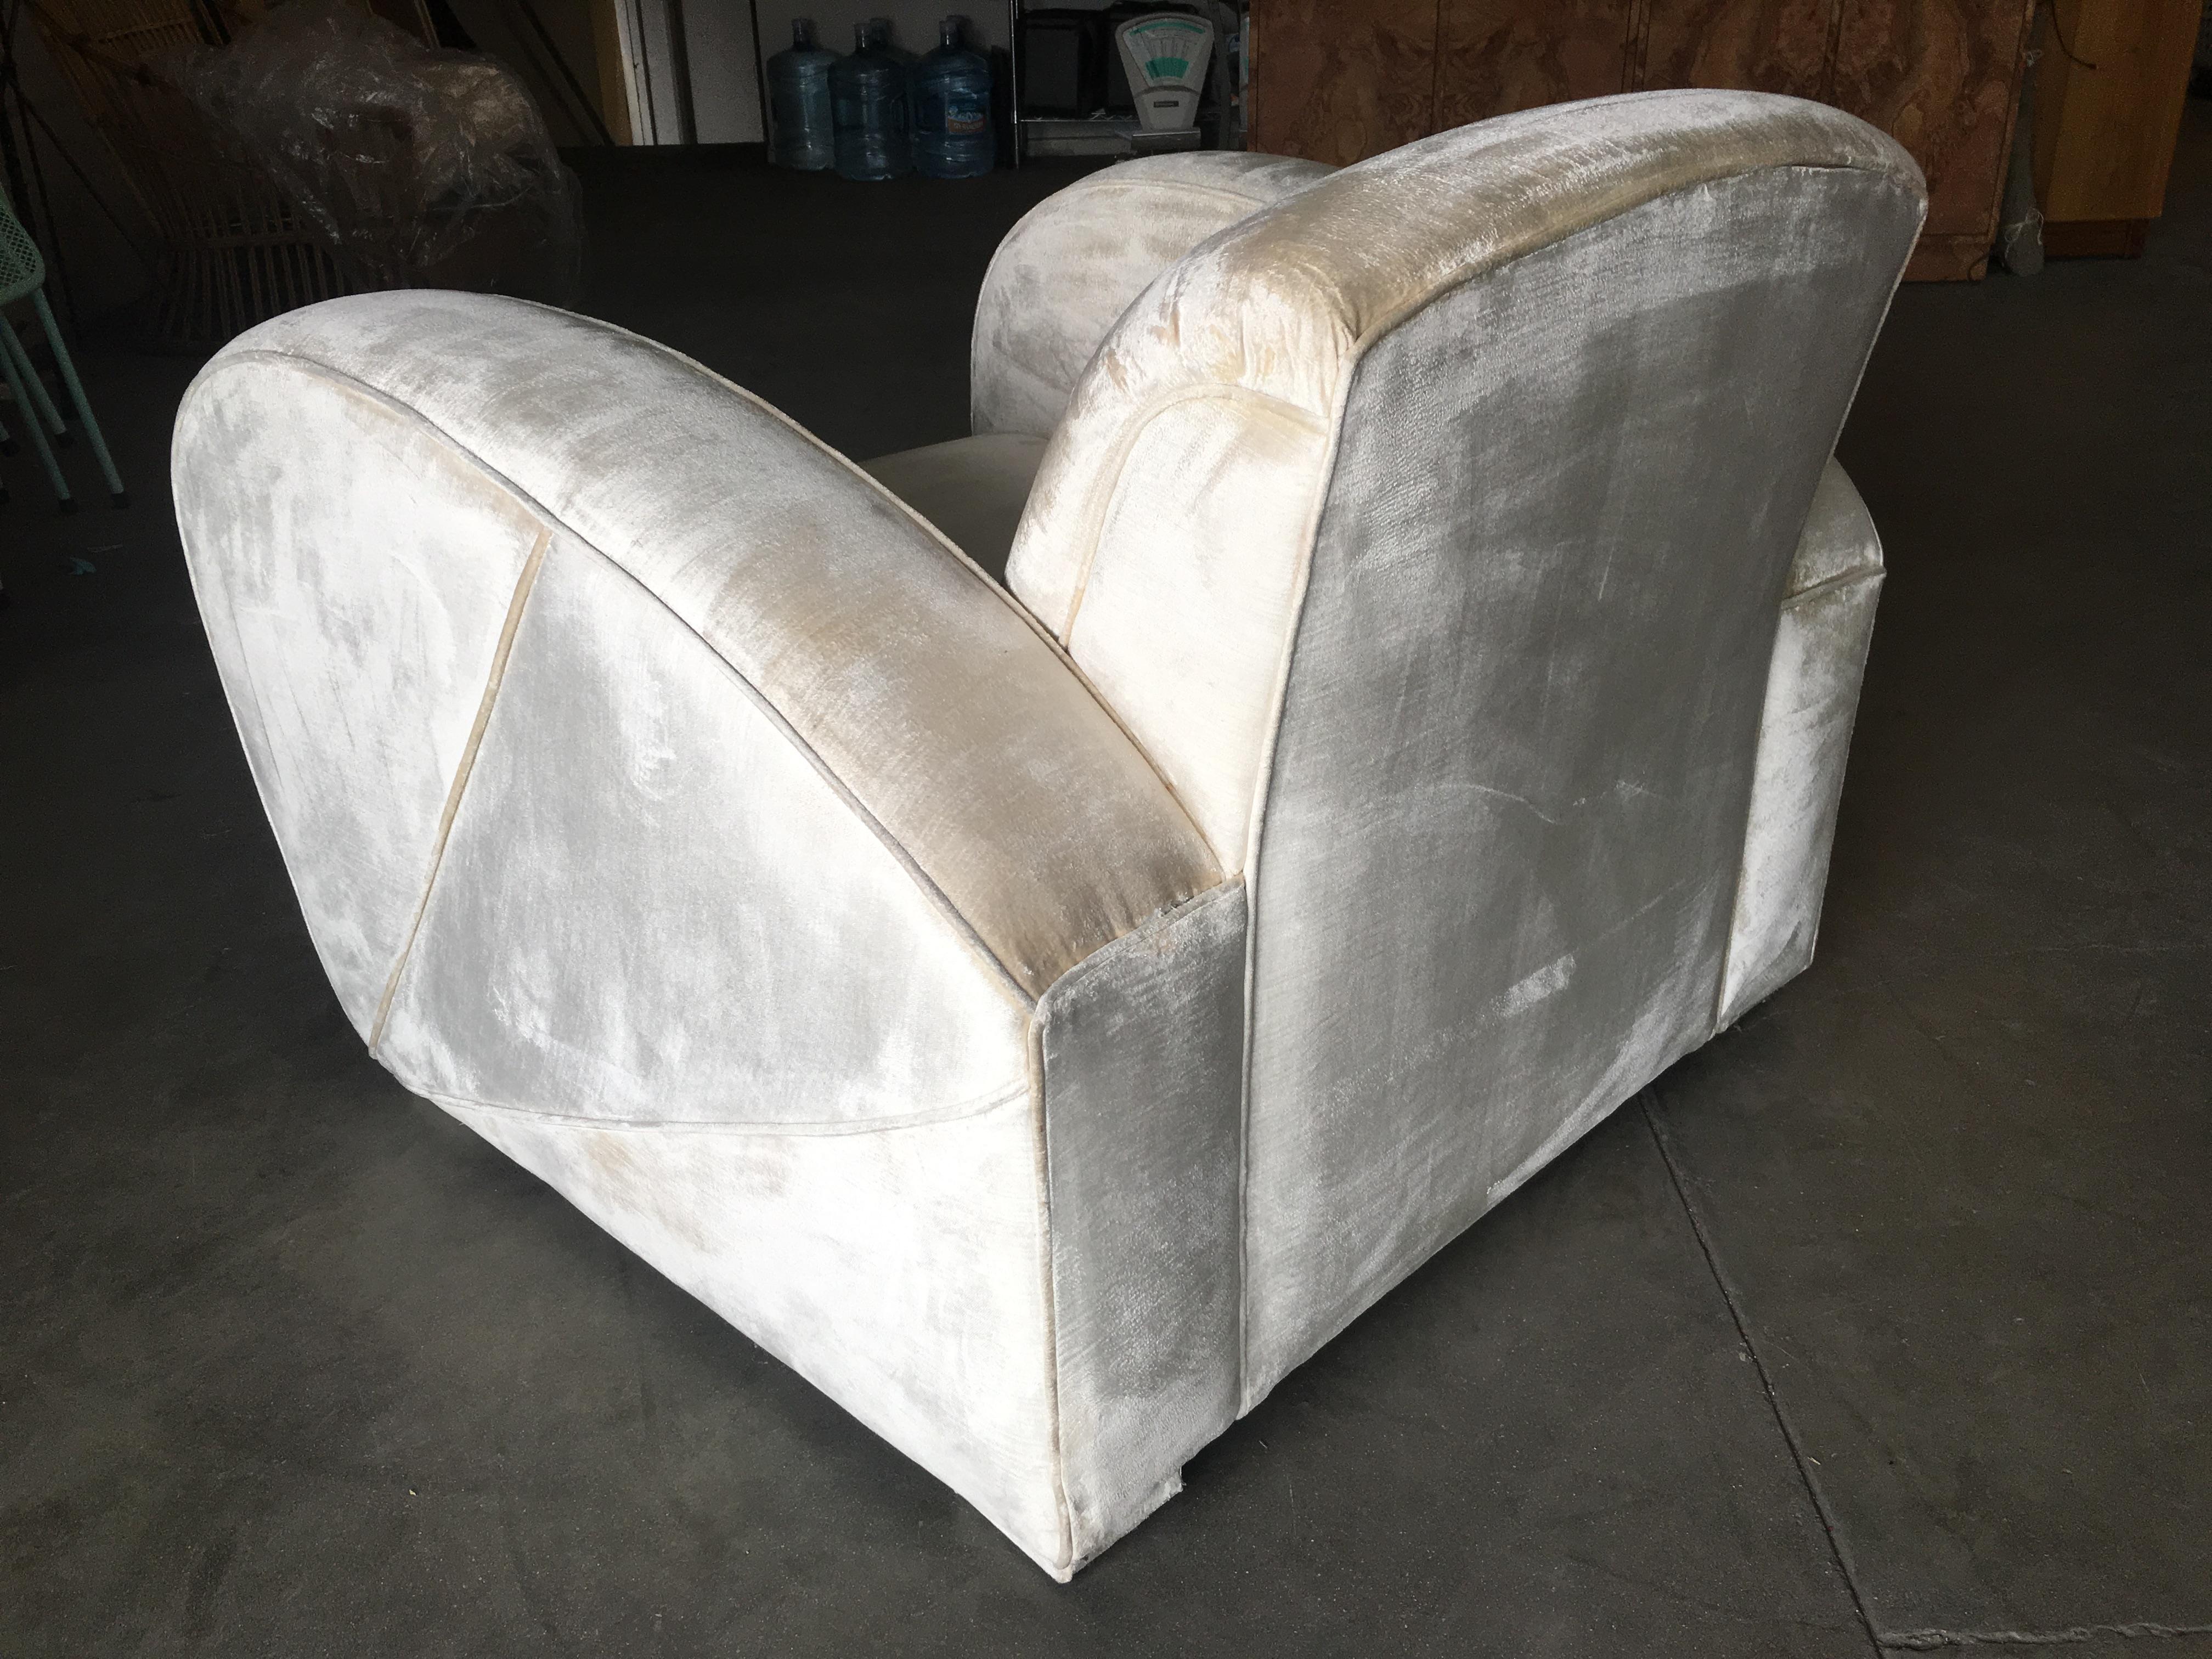 This fabulous Art Deco style jazz club chair in the style of Paul Frankl speed chair is upholstered in stunning period pearl white Mohair fabric. Manufactured in the 1970s, this lounge chair is in wonderful condition and has been re-upholstered